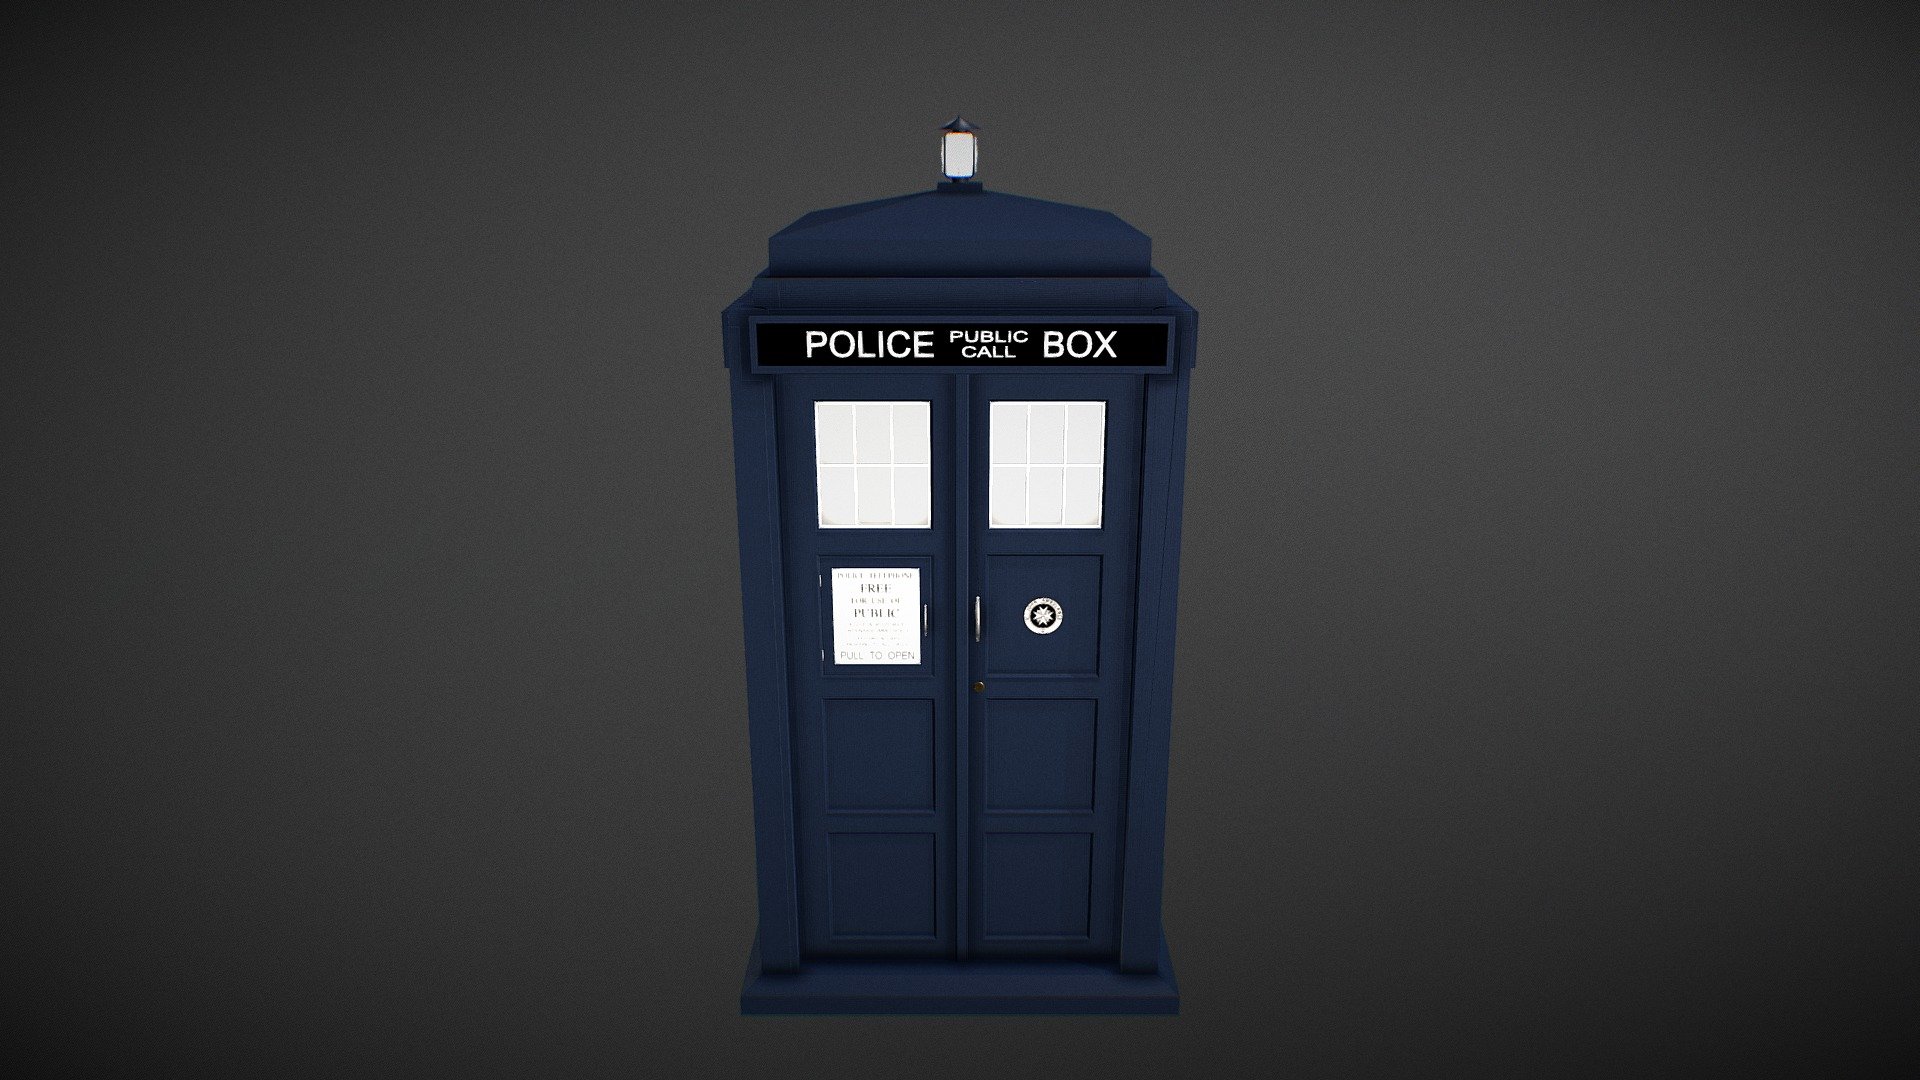 Police Box from BBC Sci-Fi Series &lsquo;Doctor Who'.

Modelled in Blender.

Work in progress 3d model